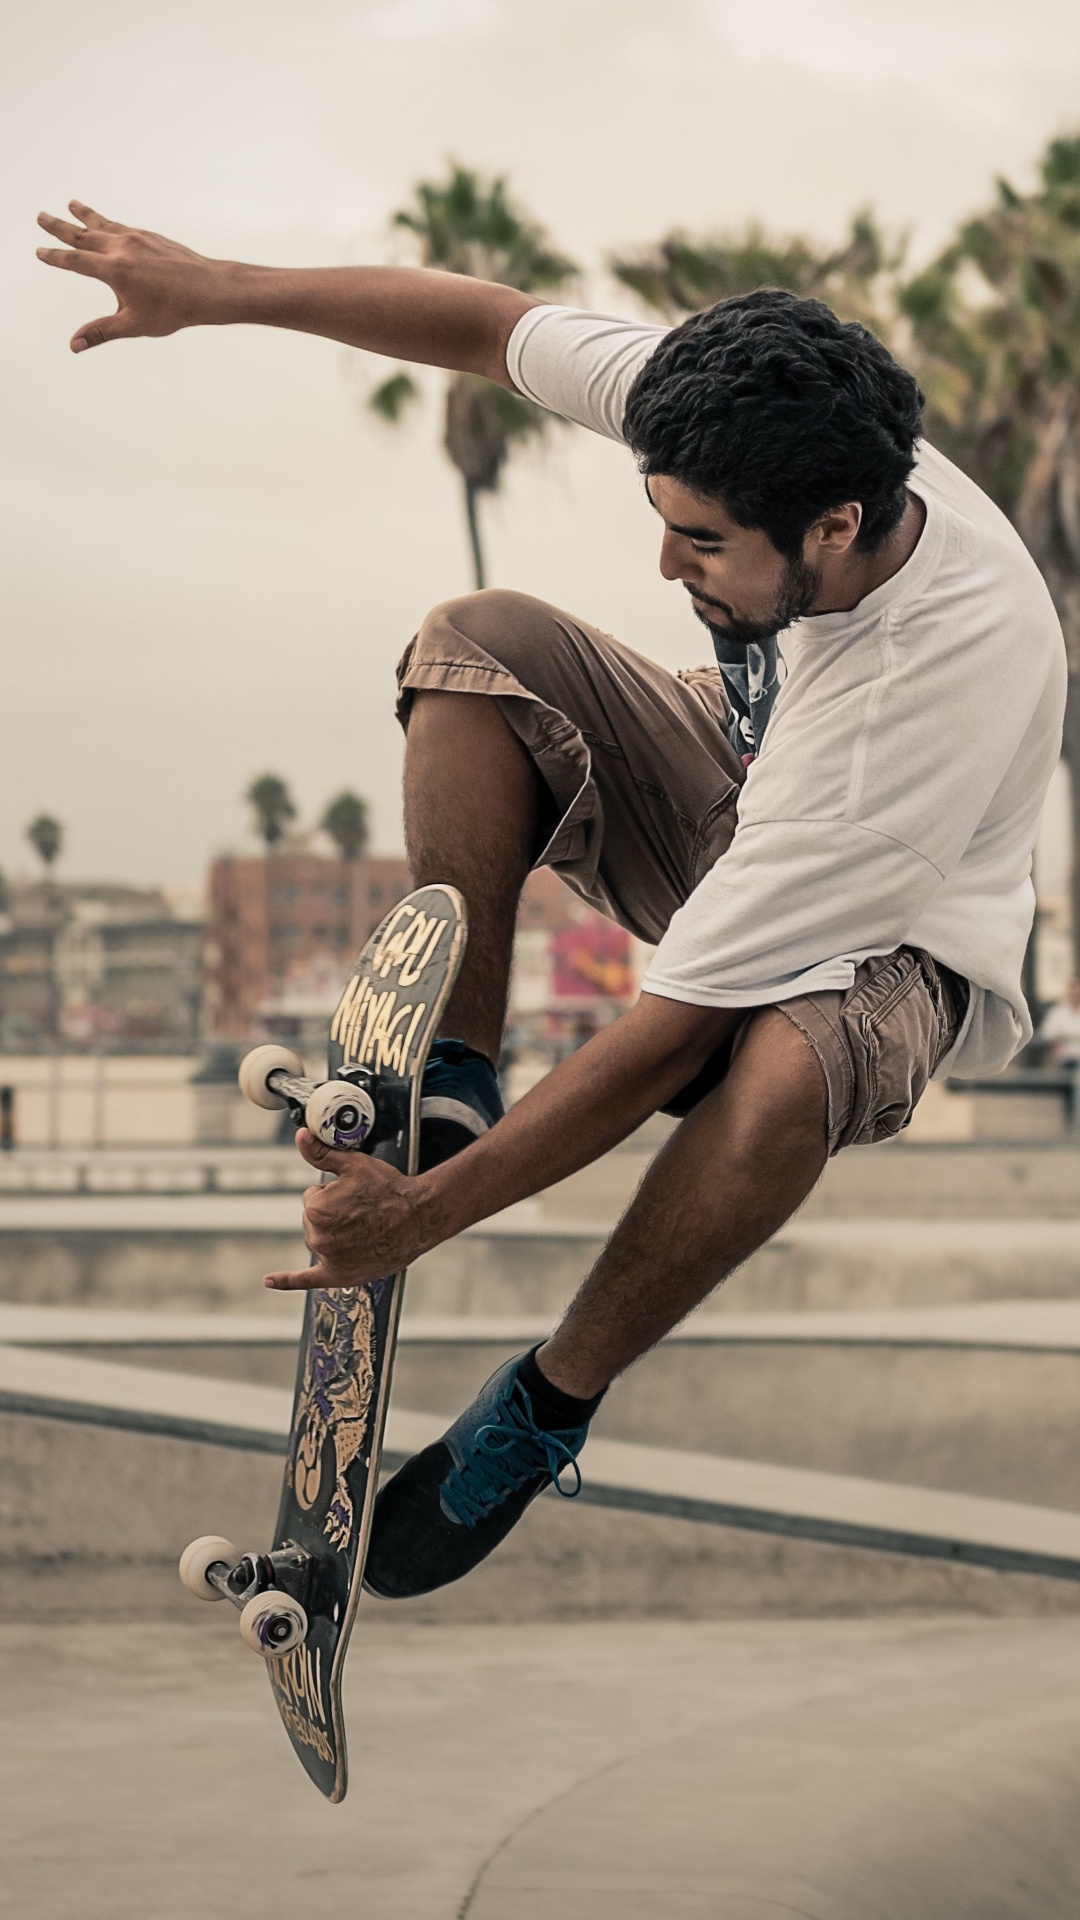 Man in White T-shirt and Brown Shorts Playing Skateboard During Daytime. Wallpaper in 1080x1920 Resolution